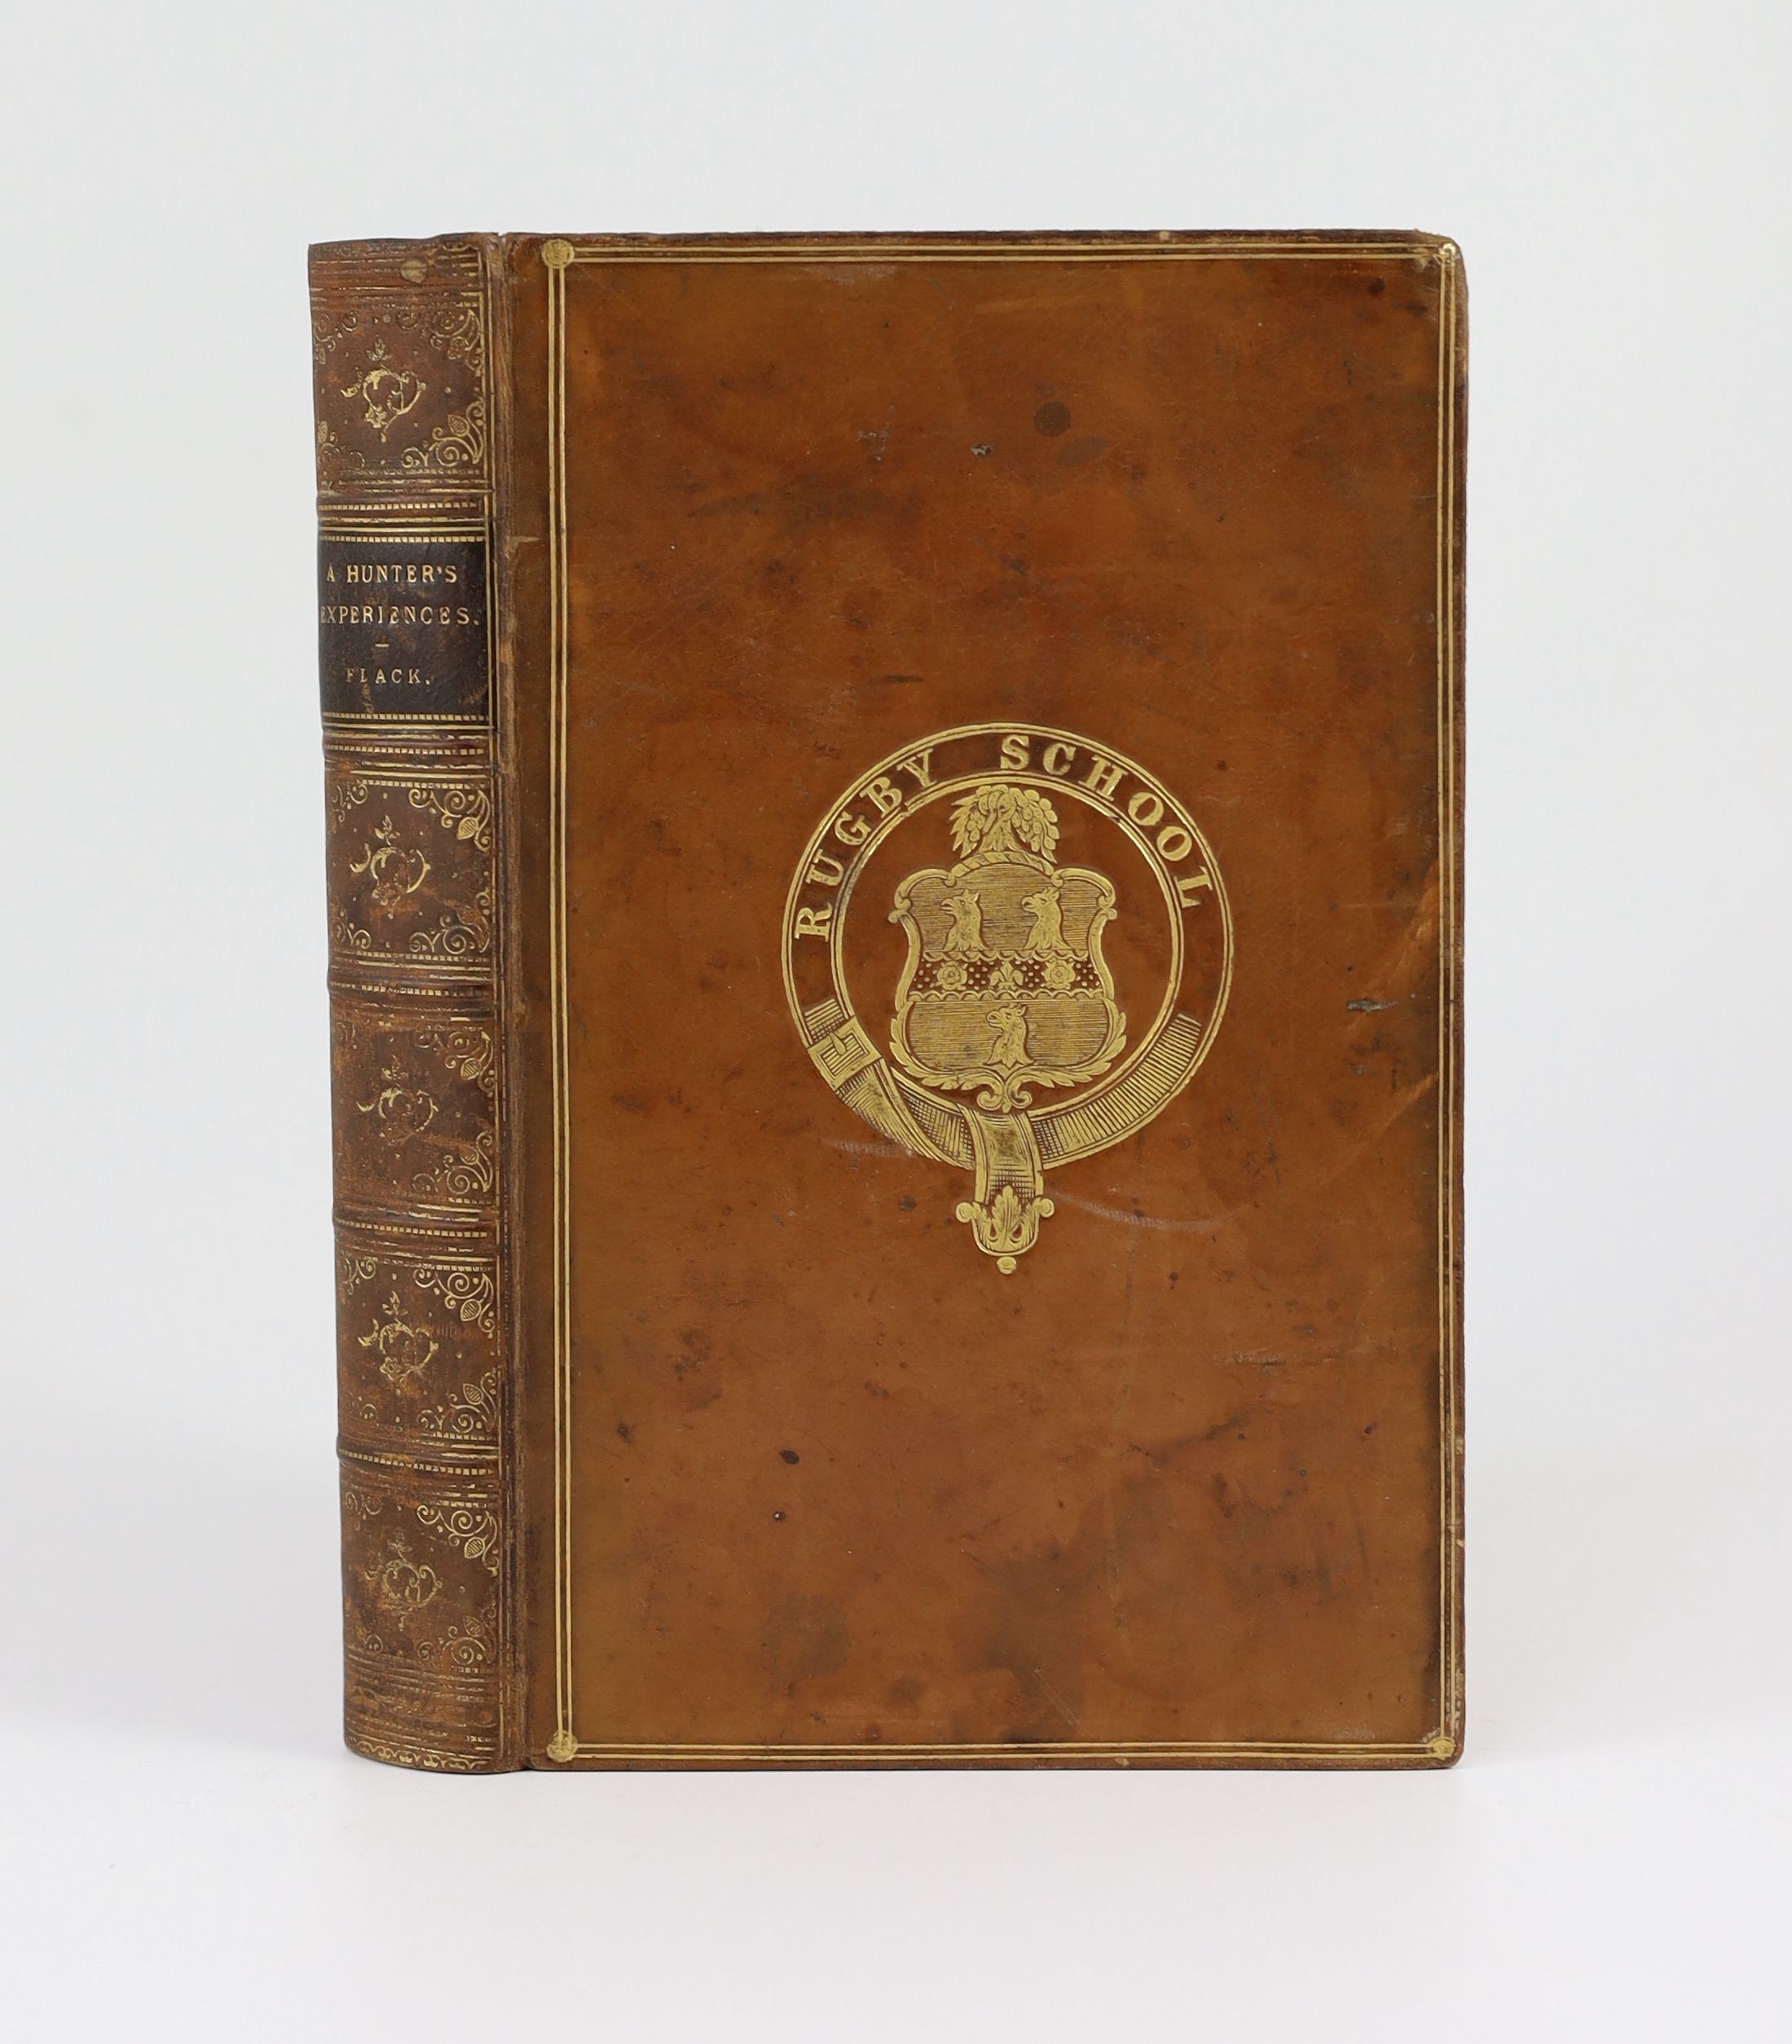 [St. John, Percy Bolingbroke]. A Hunter’s Experiences in the Southern States of America. Being an Account of the Natural History of the various Quadrupeds and Birds which are the Objects of Chase in Those Countries. By C